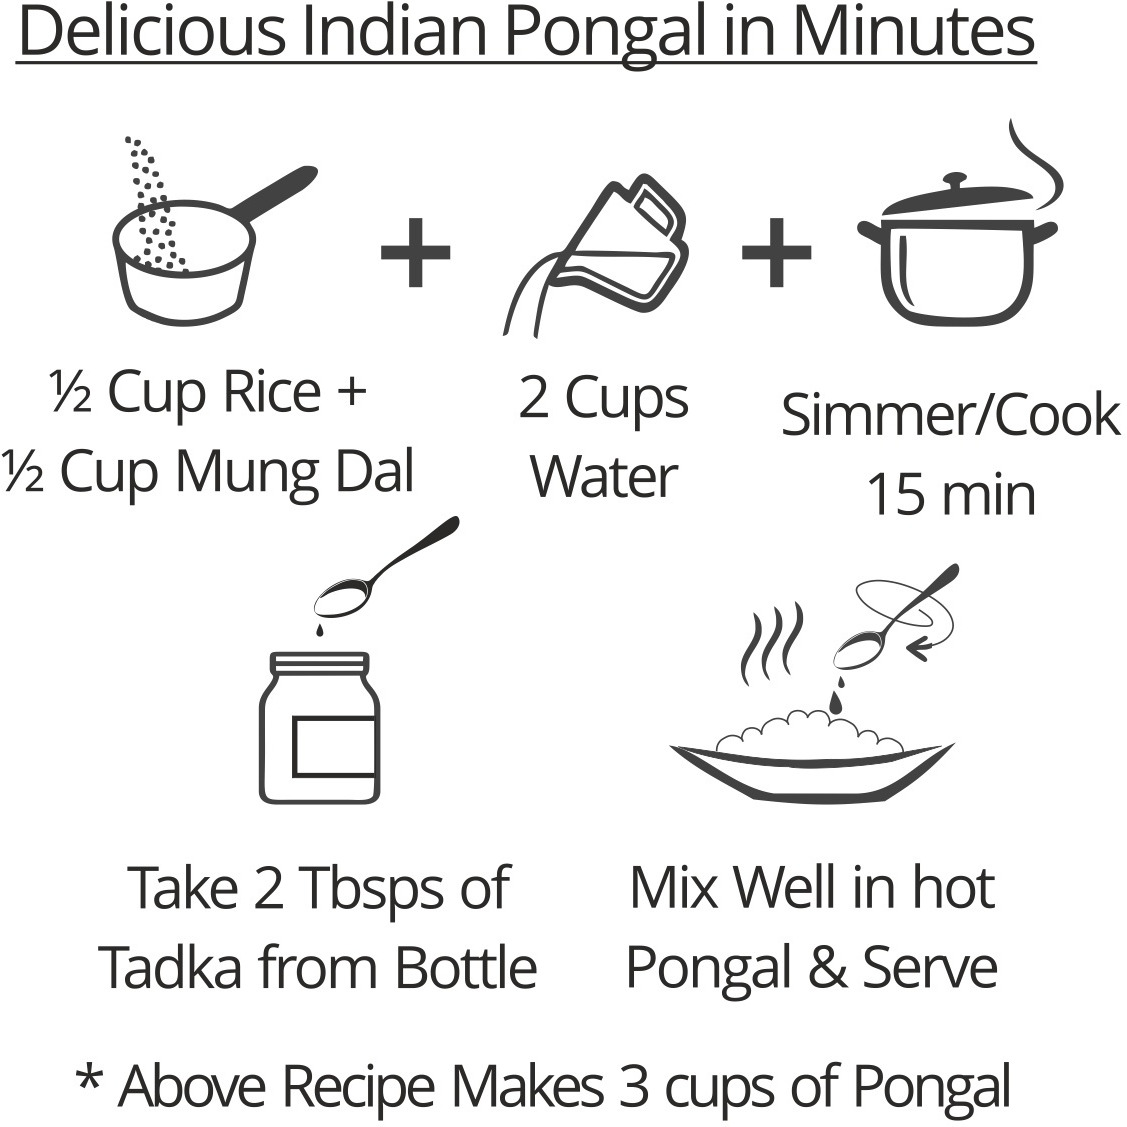 EL The Cook Ready-to-Use Ghee Tadka(CONCENRATED Whole Spice Tempering) for Pongal (South Indian Kitchari), Indian Lentils Seasoning, Super Saver Jar Pack, 6.34oz, Vegetarian, Gluten-Free (Flavor: South Indian Pongal)